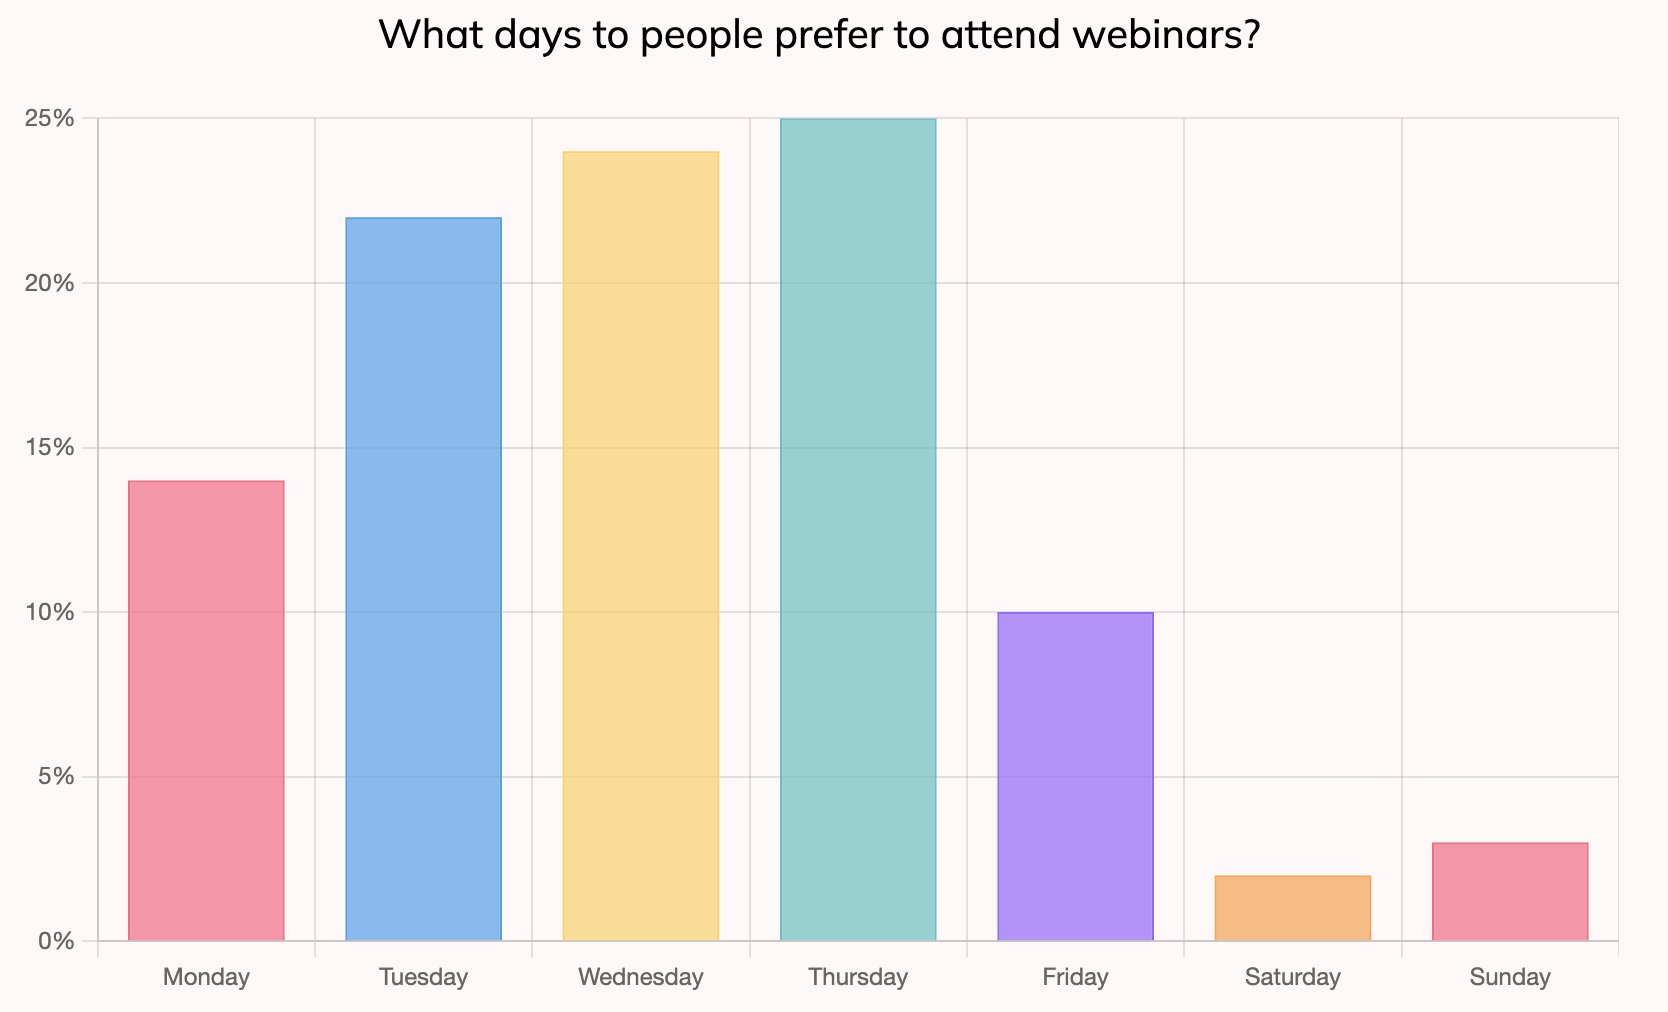 The optimal days attendees prefer to attend webinars - Maximize attendance